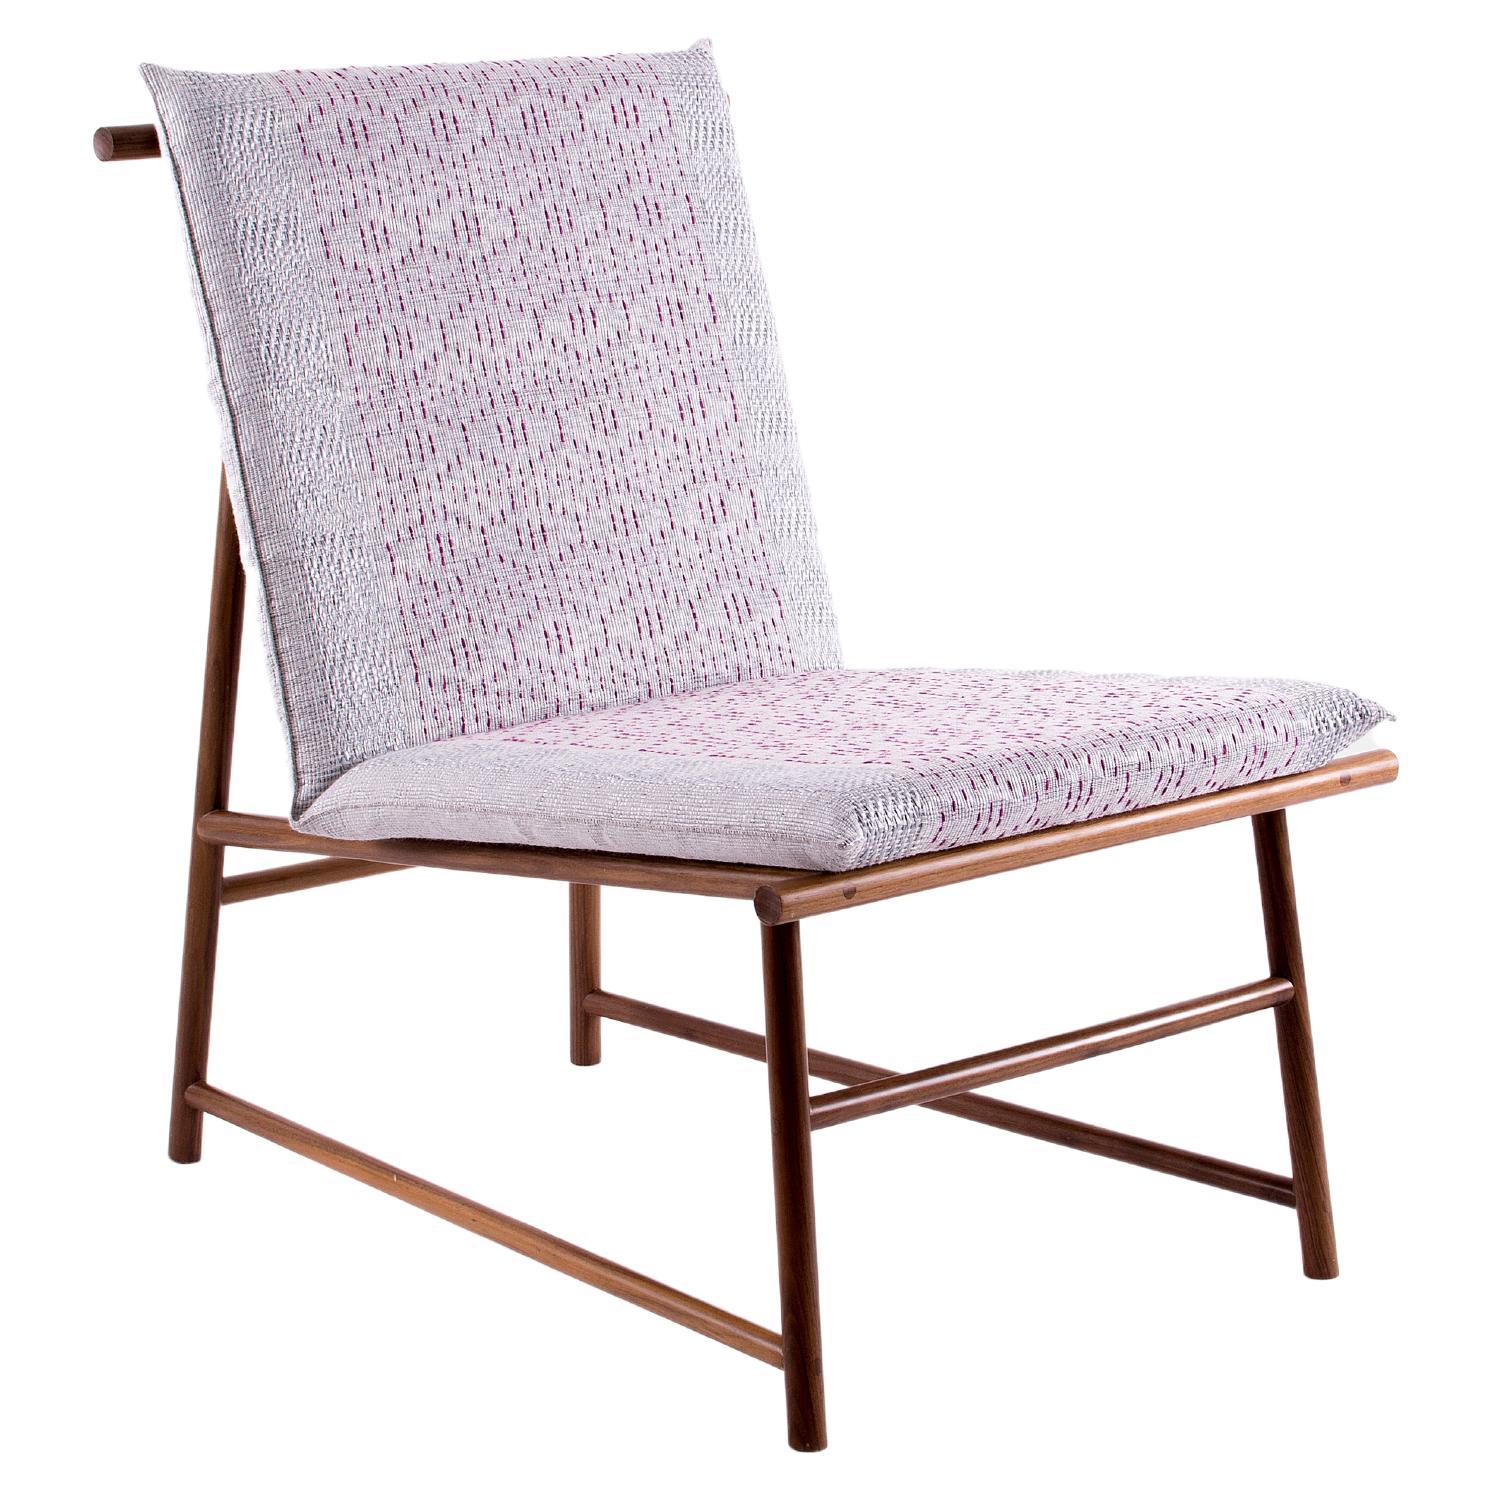 Easychair, Lounge Chair in Walnut Wood with Handmade Raffia Textile in Pedalloom For Sale